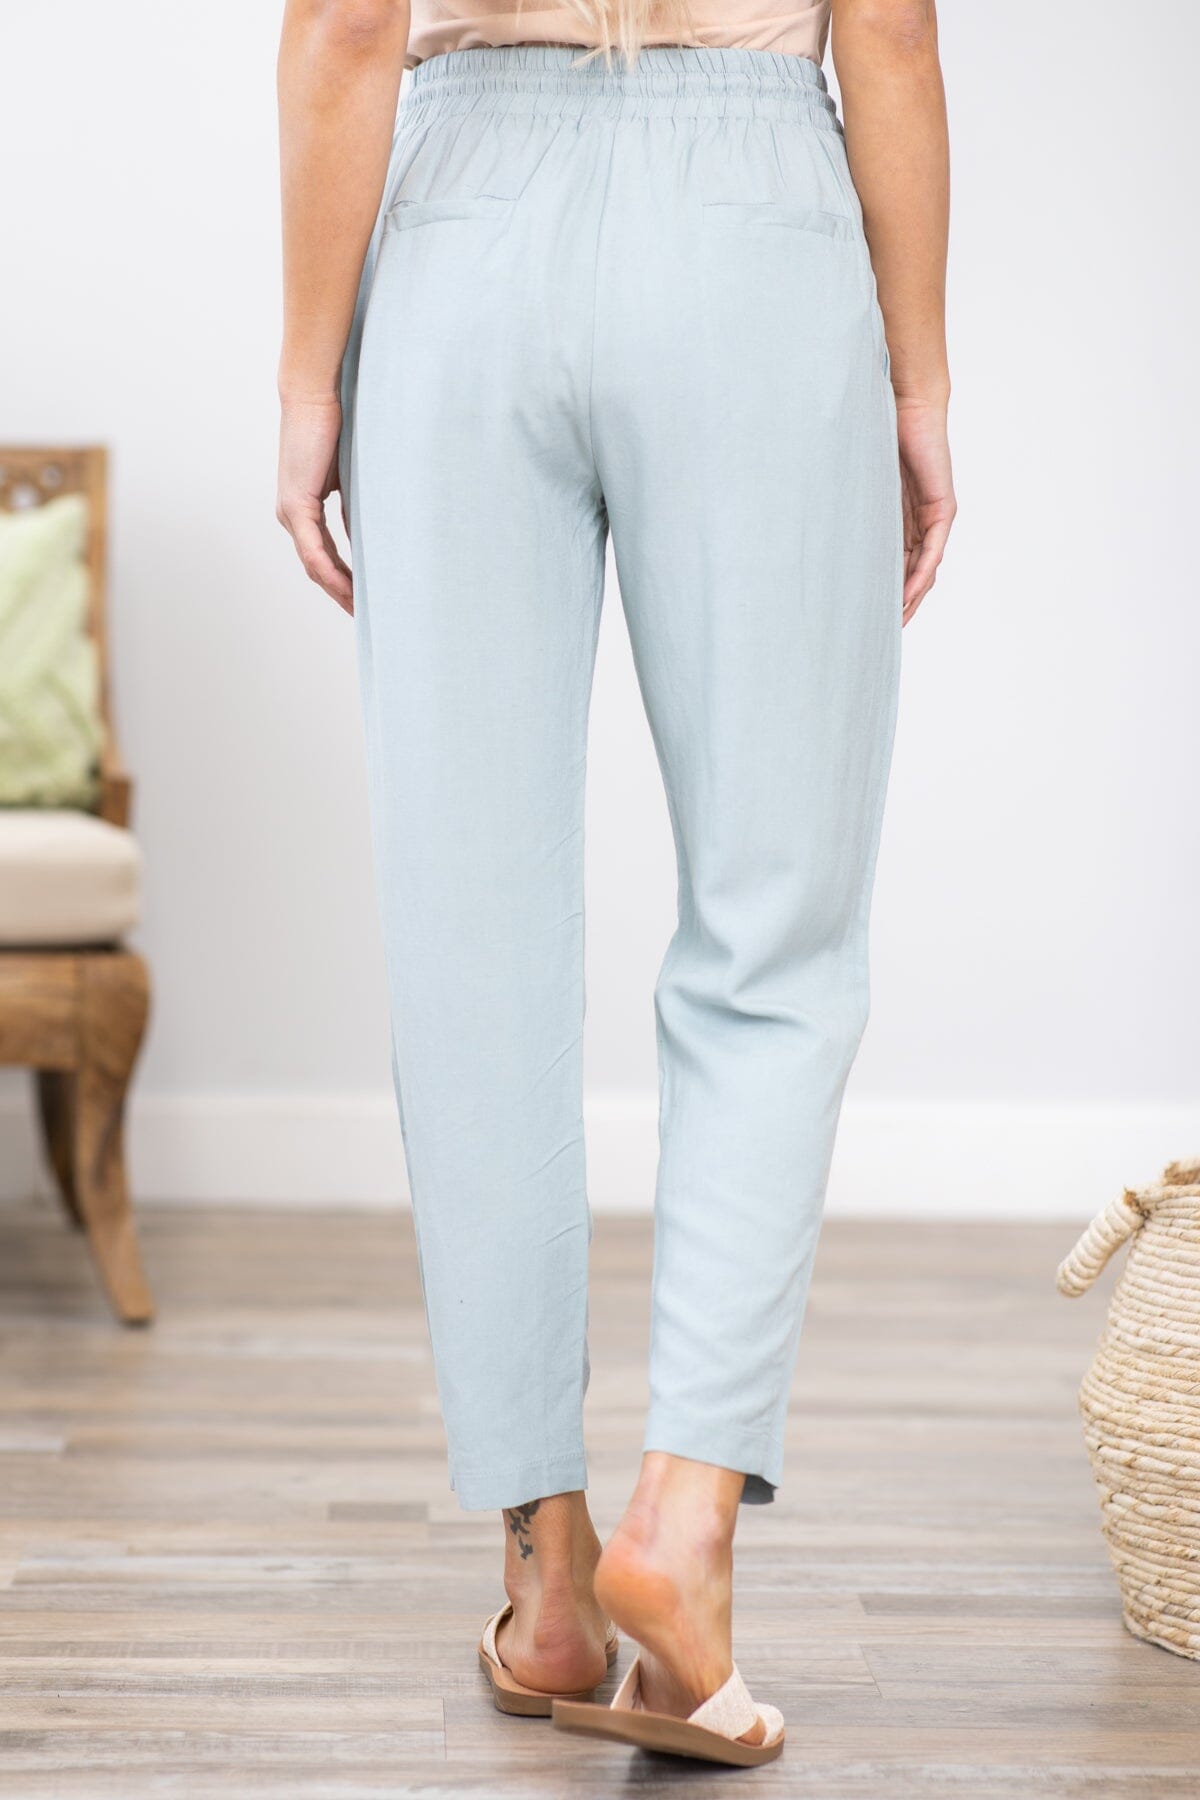 Pastel Blue Elastic Waist Tapered Leg Pant - Filly Flair